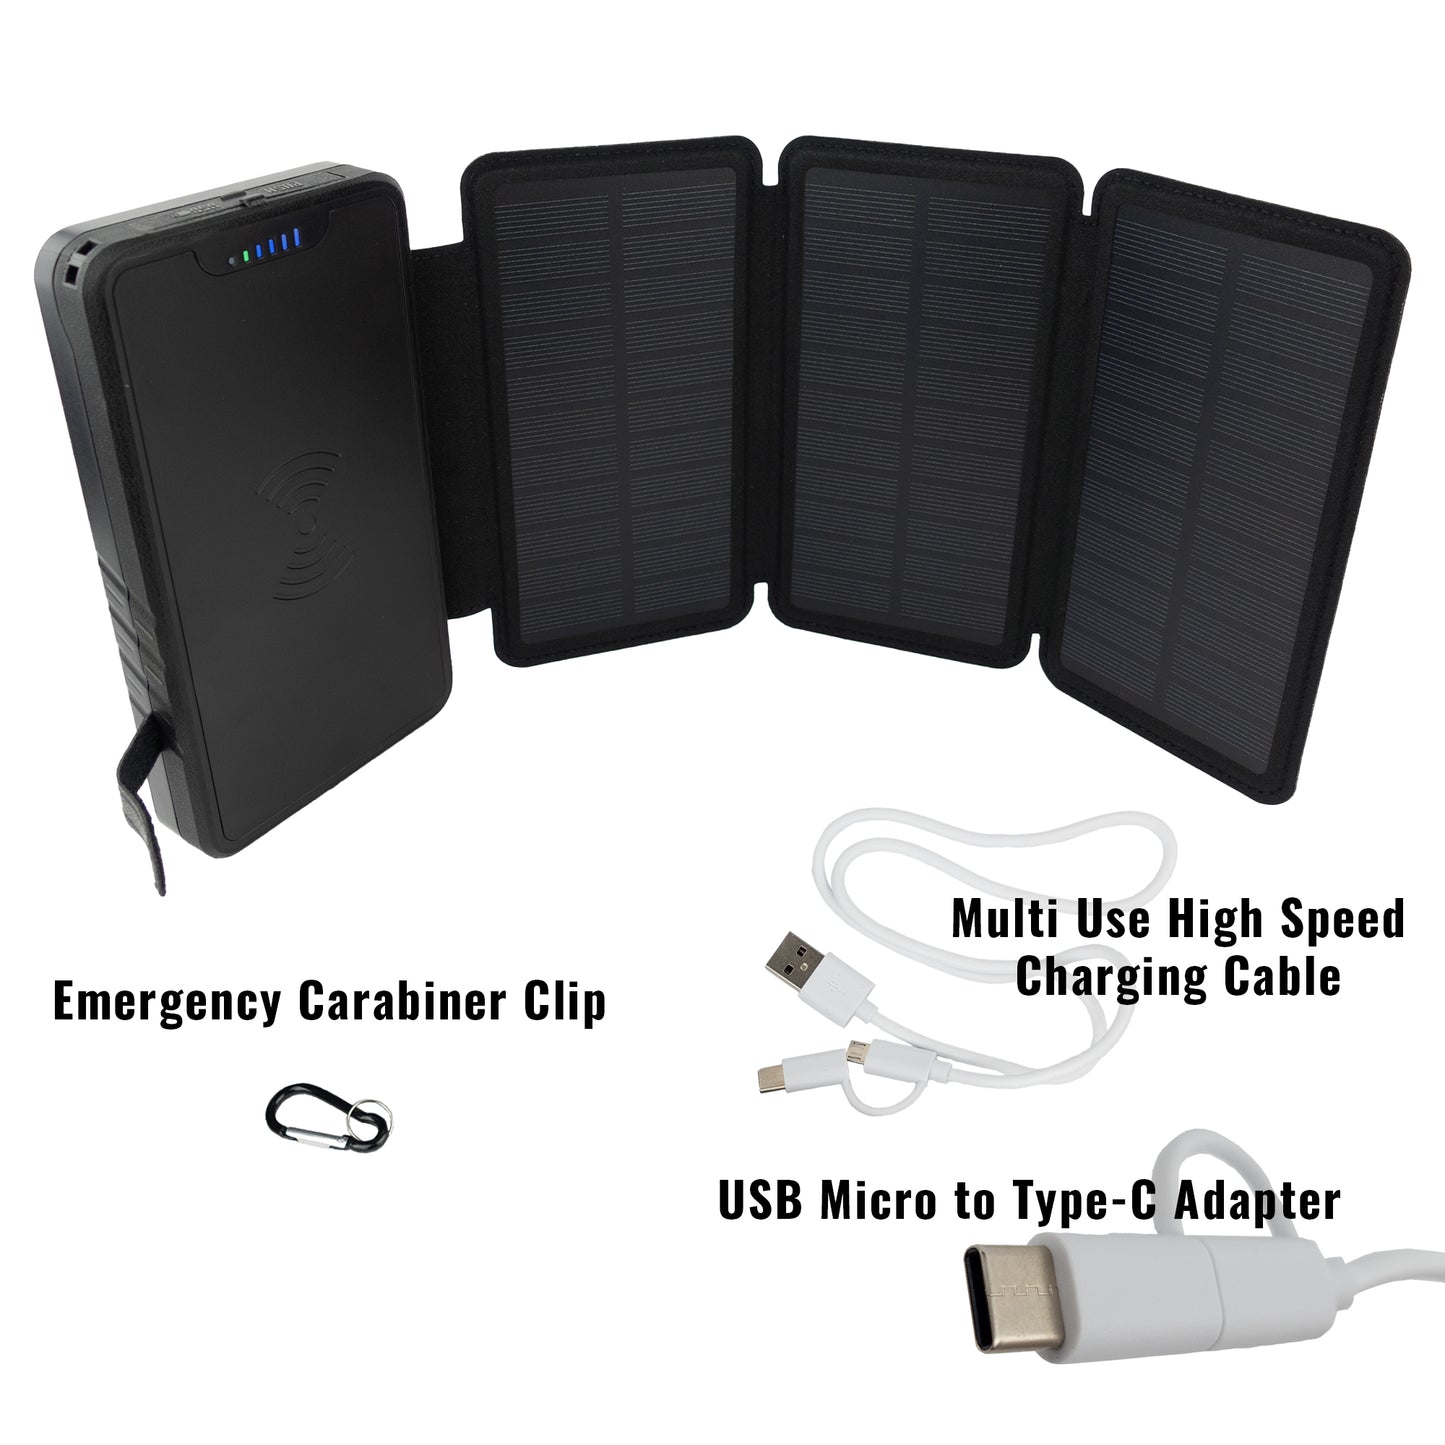 [ Bulk Pack of 5 ] Tough Light 820W 3 Panel USB Solar Power Bank Charger - 20,000mAh Li Polymer with WIRELESS Phone Charging - 2AMP High Speed Cable Included